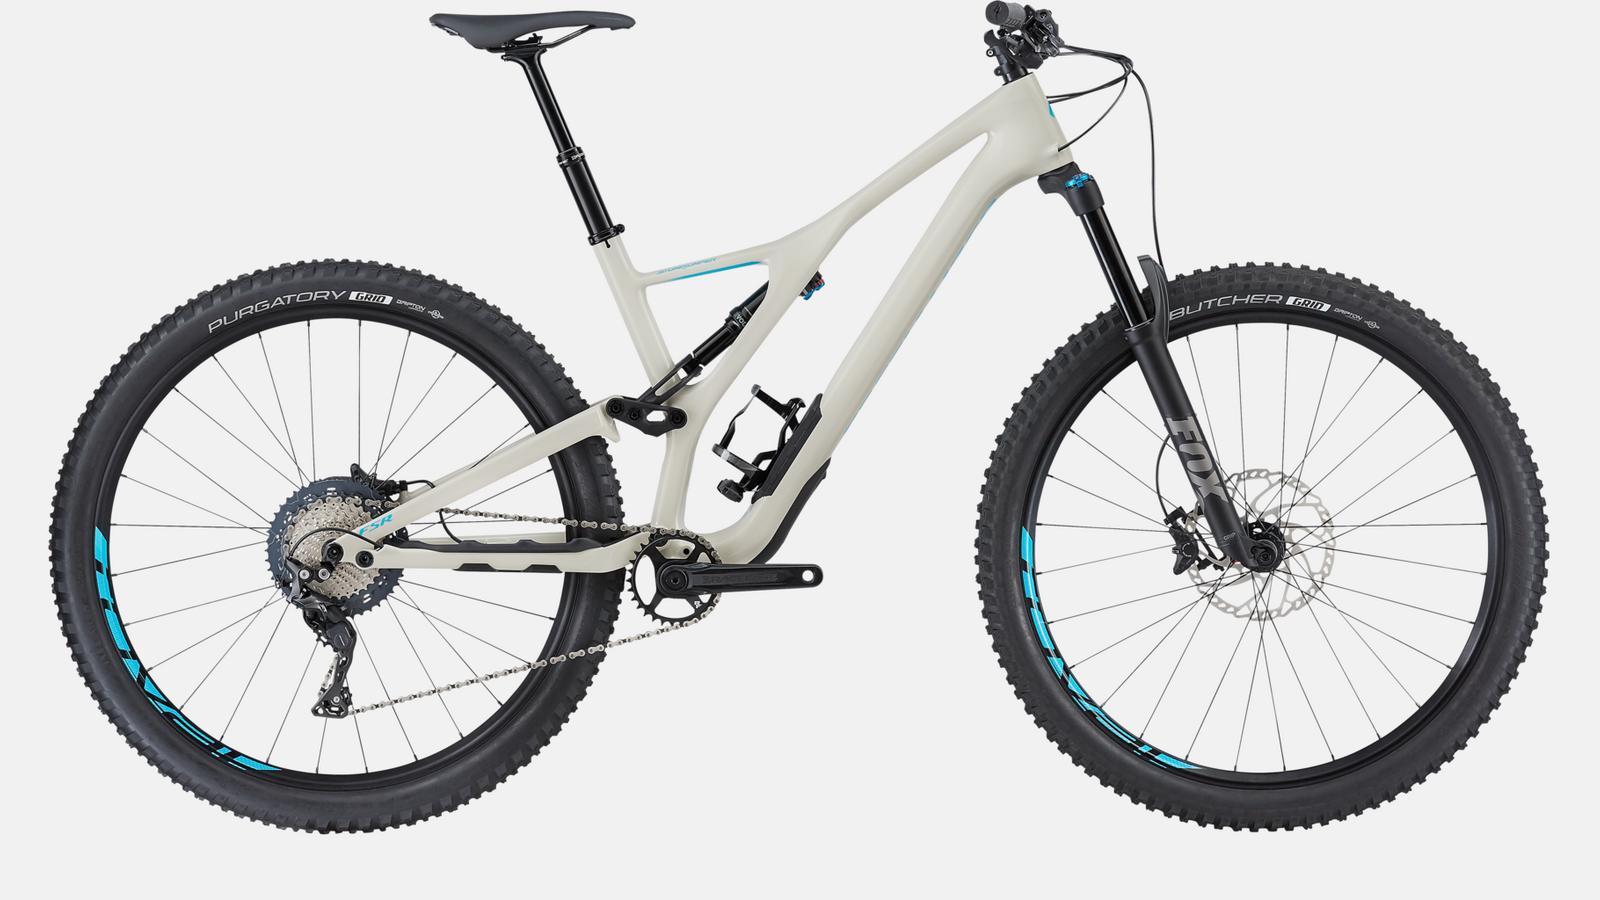 Paint for 2019 Specialized Men's Stumpjumper Comp Carbon 29 - Gloss White Mountains